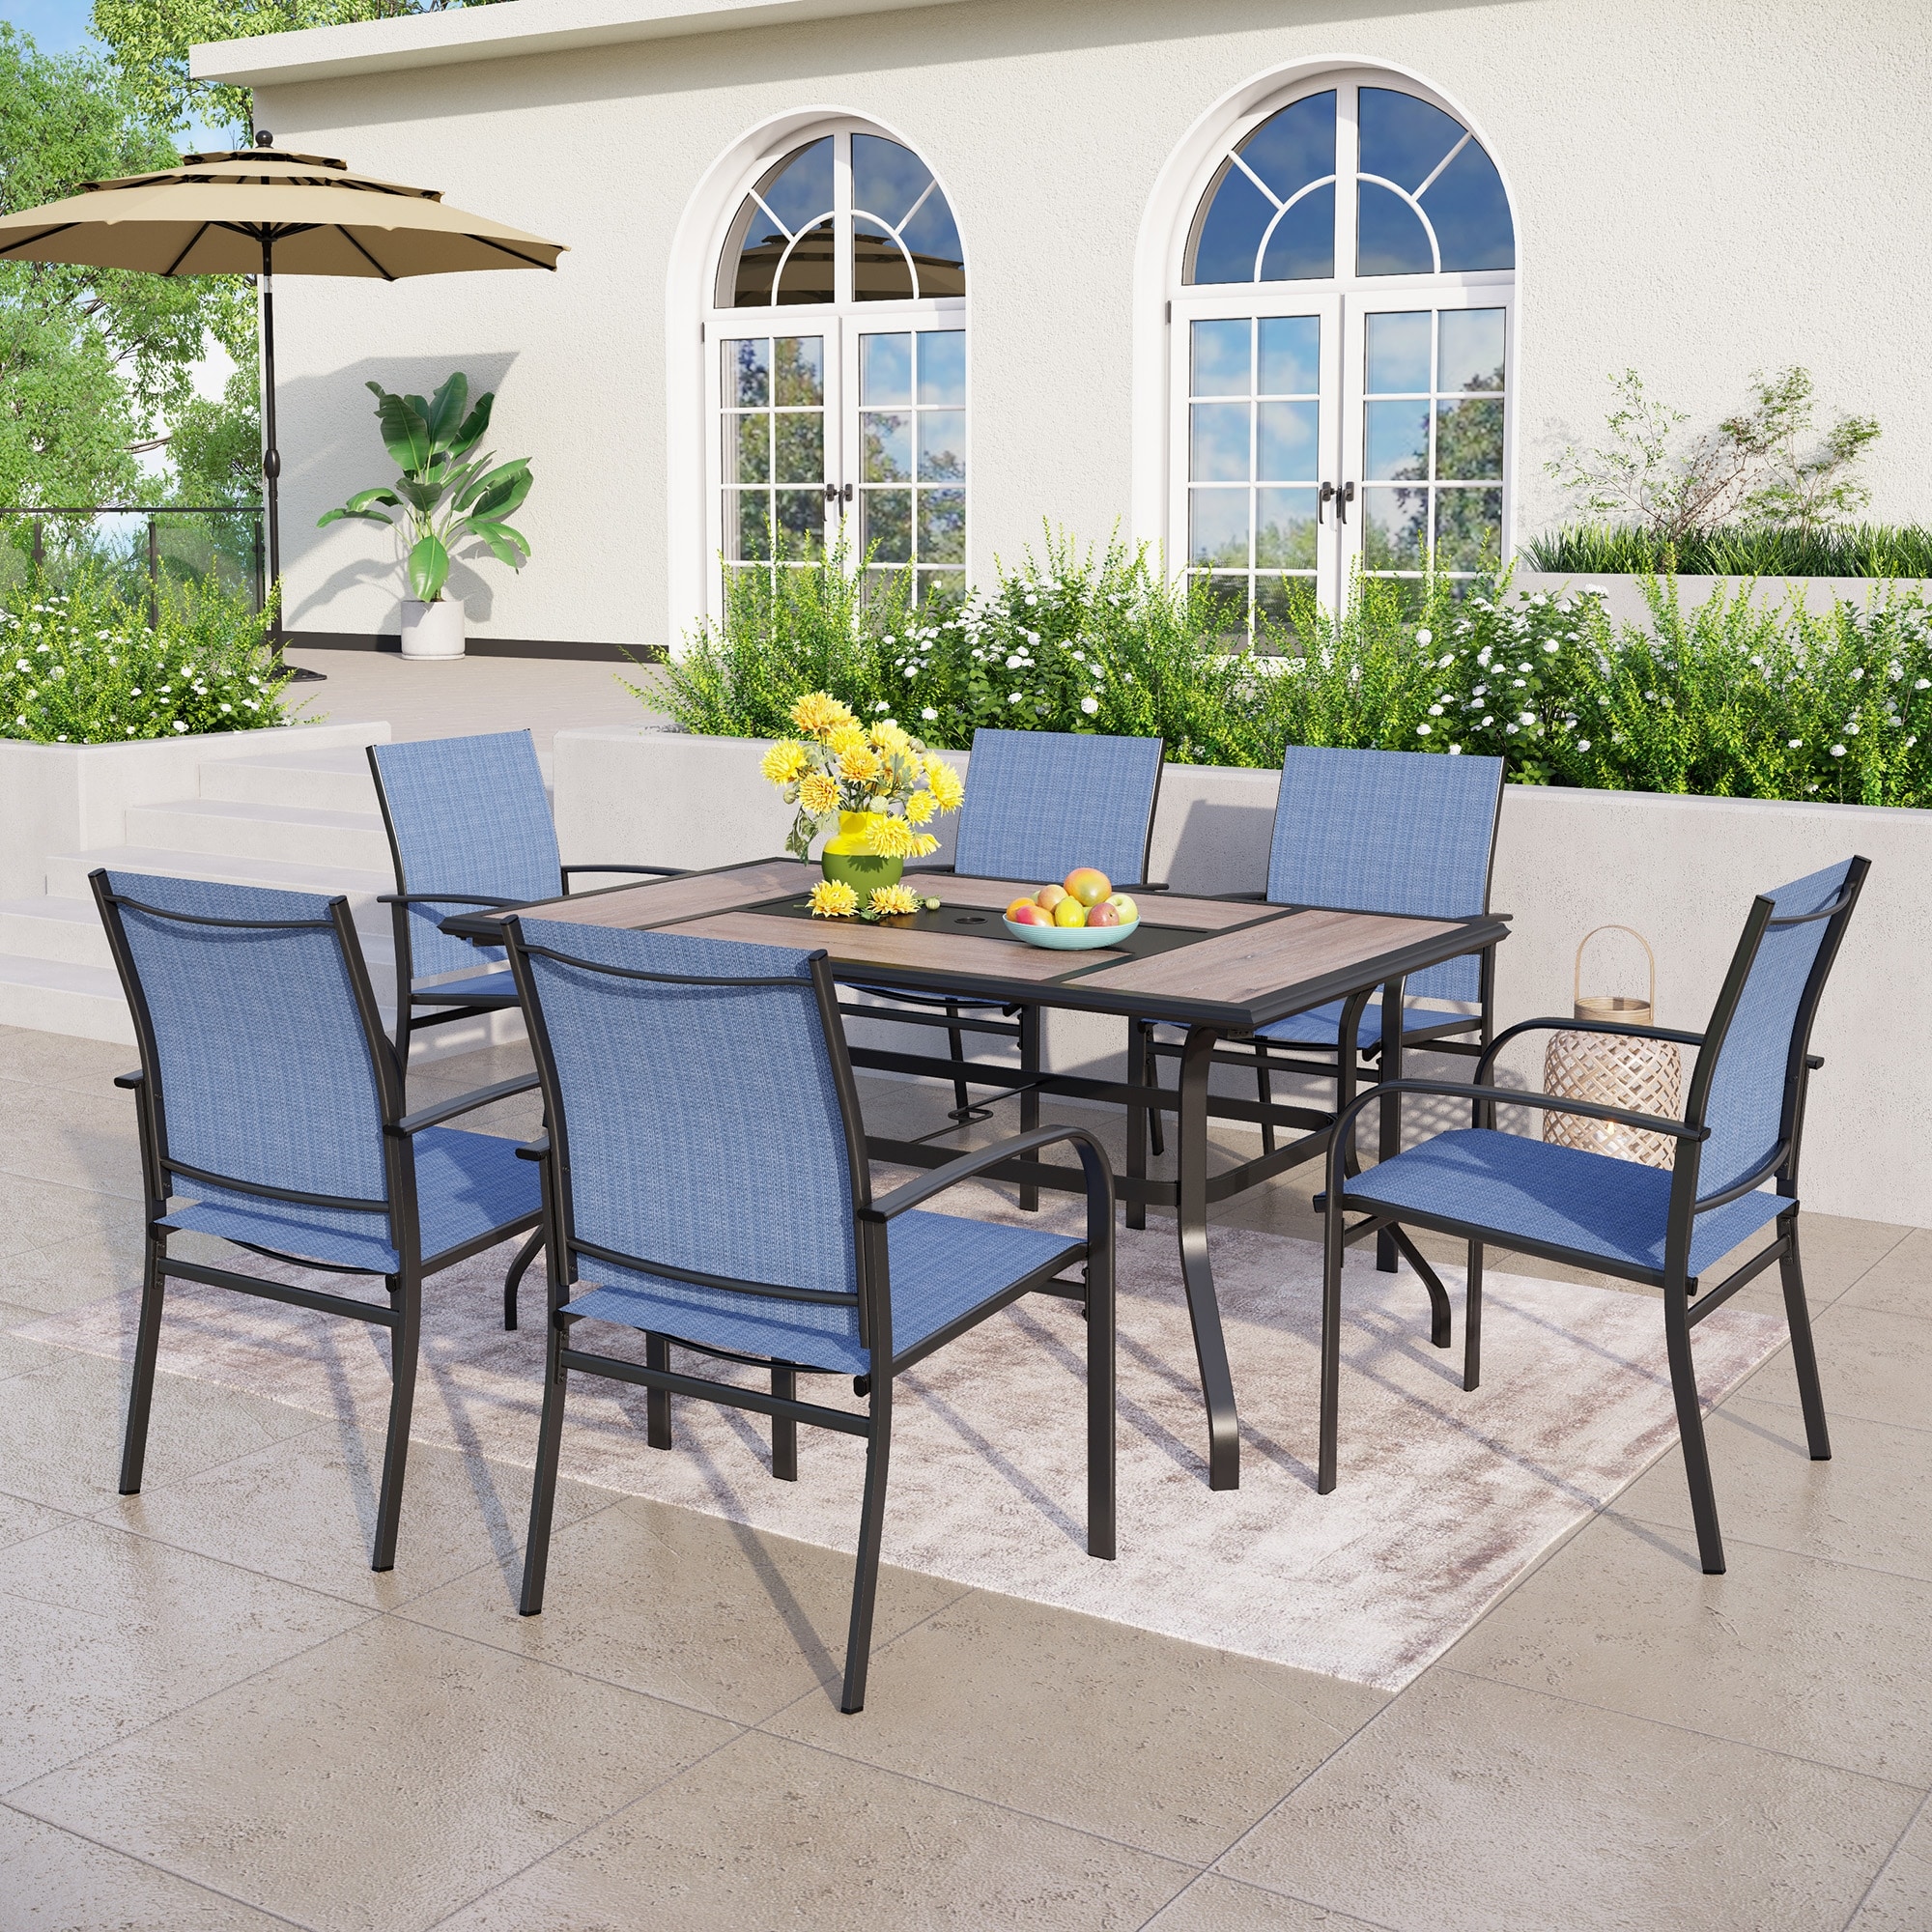 Patio Dining Set 7-piece Metal Wood-look Geometric Rectangle Table And 6 Textilene Chairs